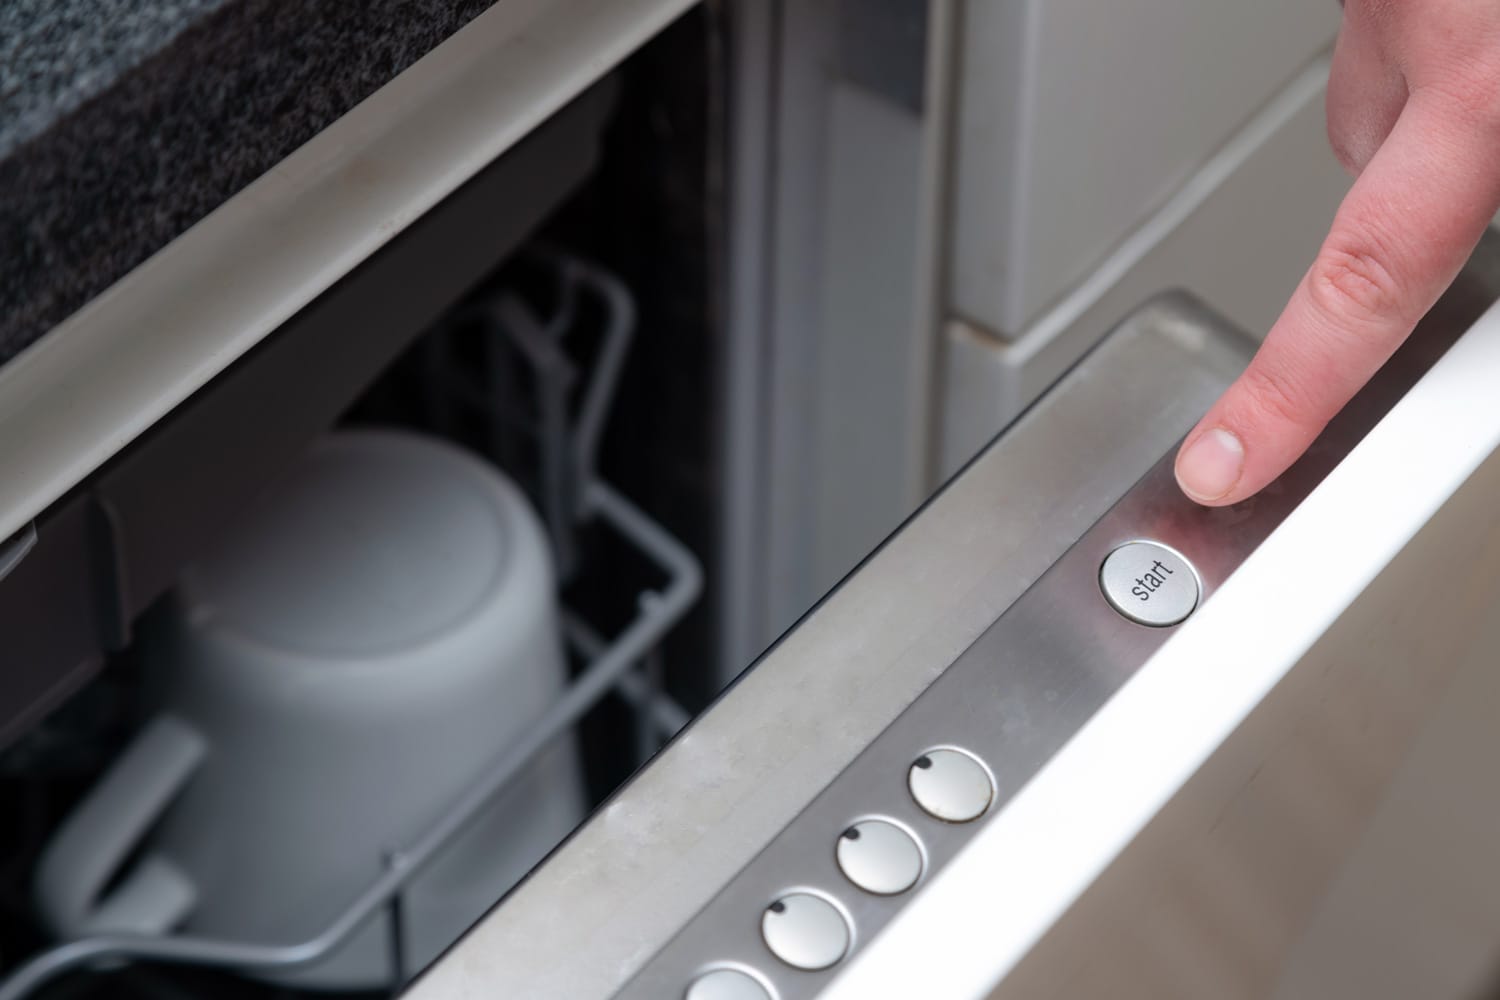 Close up of finger pressing start button on dishwasher in the kitchen. Hand starting dish washer machine